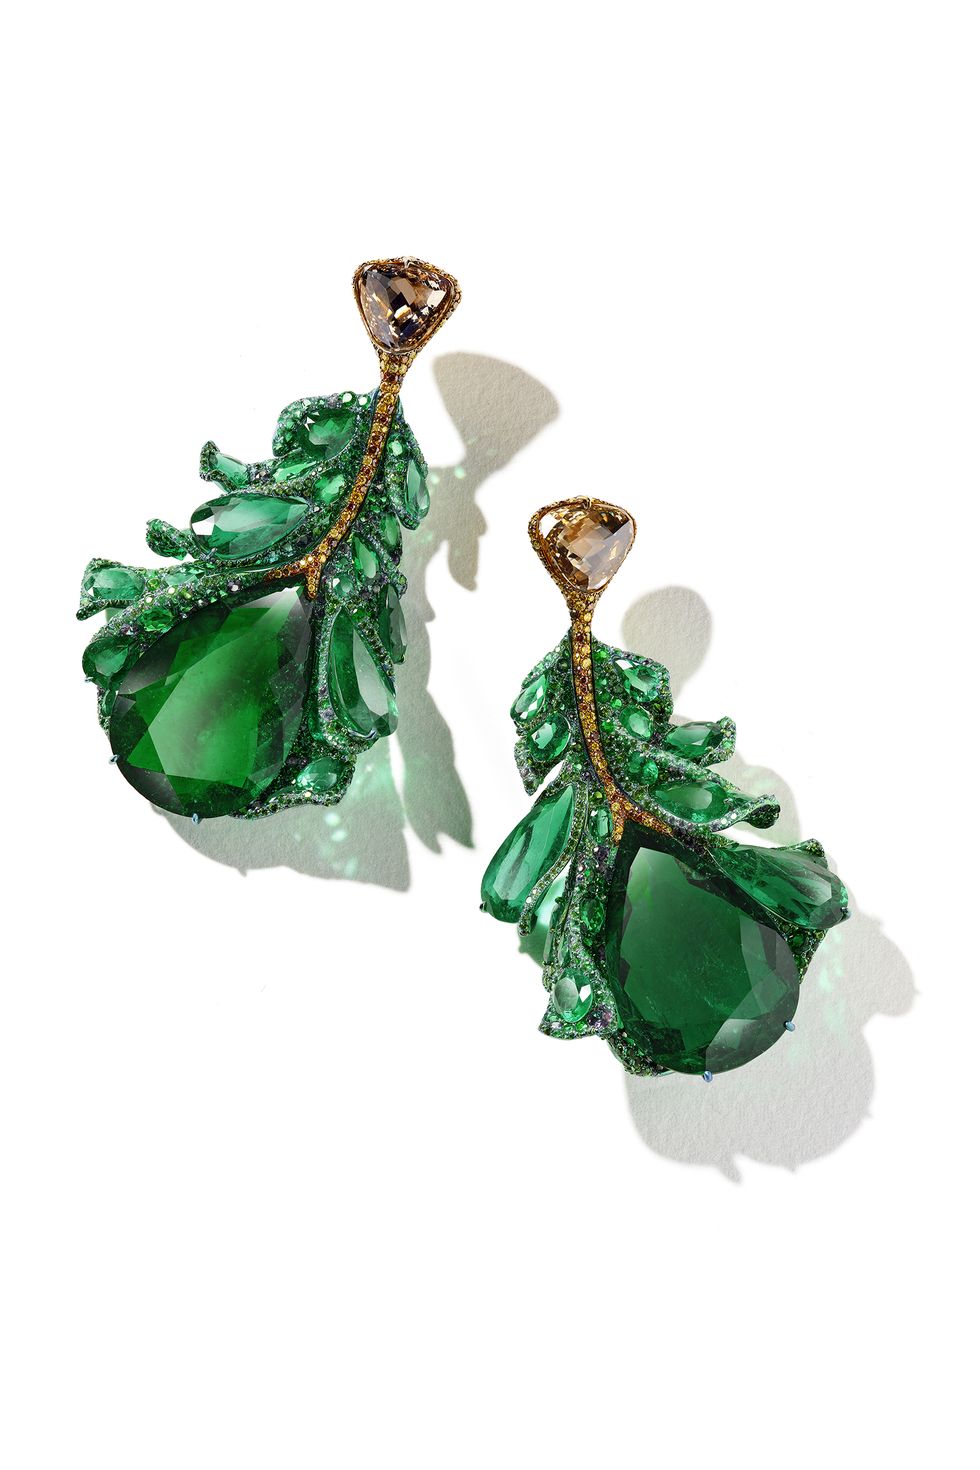 EN- LIFESTYLE – Best of High Jewelry in Paris, when magic meets